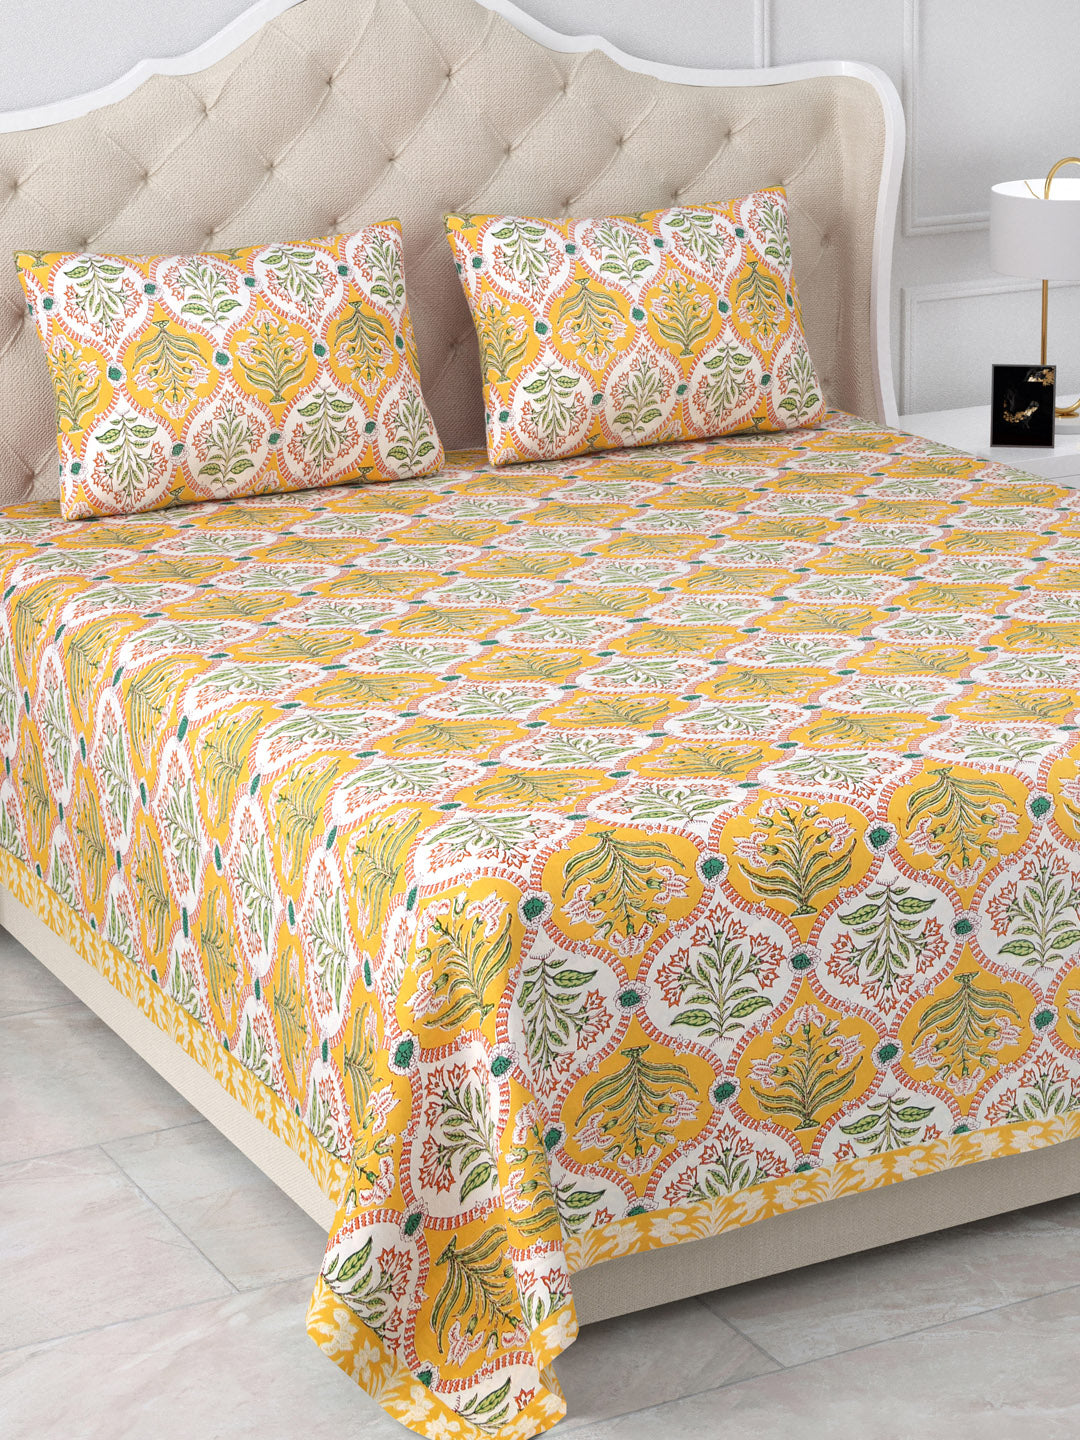 Maharani’s Dreamscapes Yellow & Green Cotton Double Bedsheet with 2 Pillow Covers